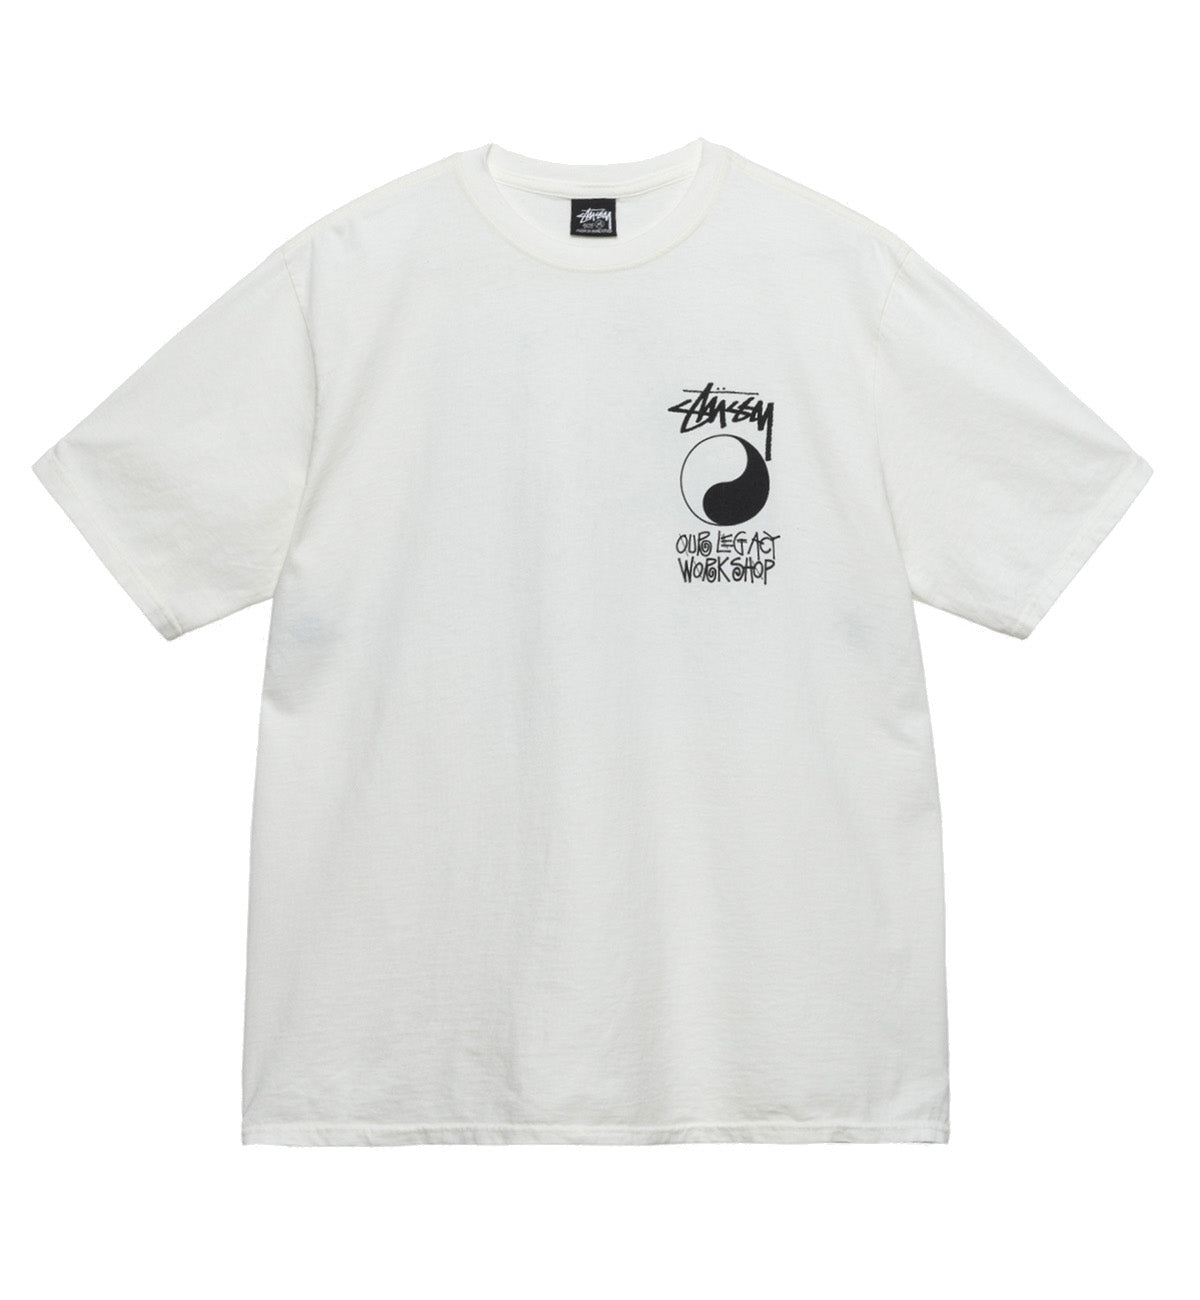 Stussy x Our Legacy Surfman Tee (Black) | Shop authentic streetwear ...